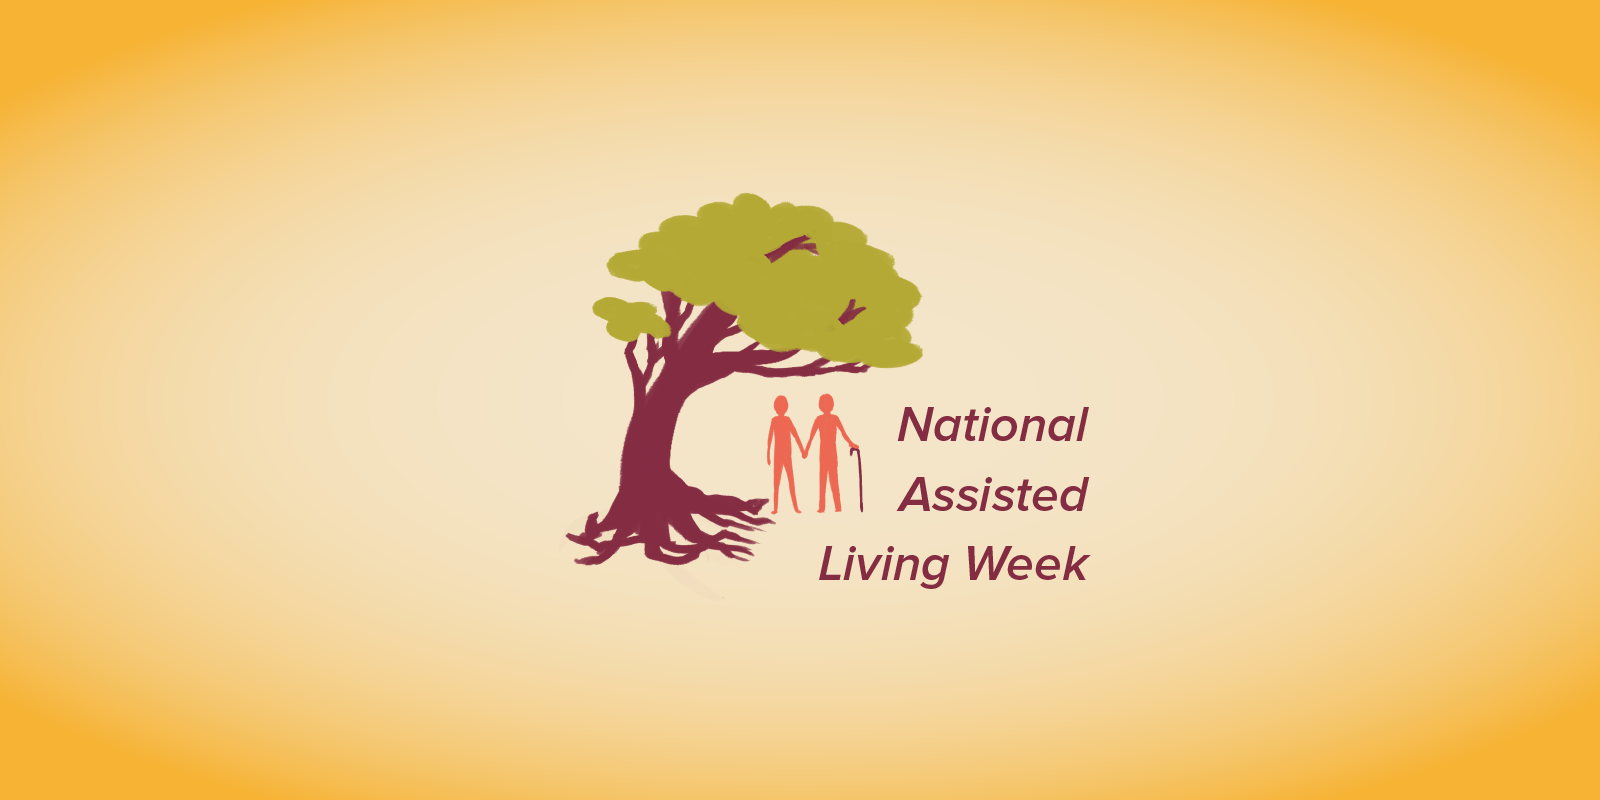 The Parkway Senior Living Recognizes National Assisted Living Week